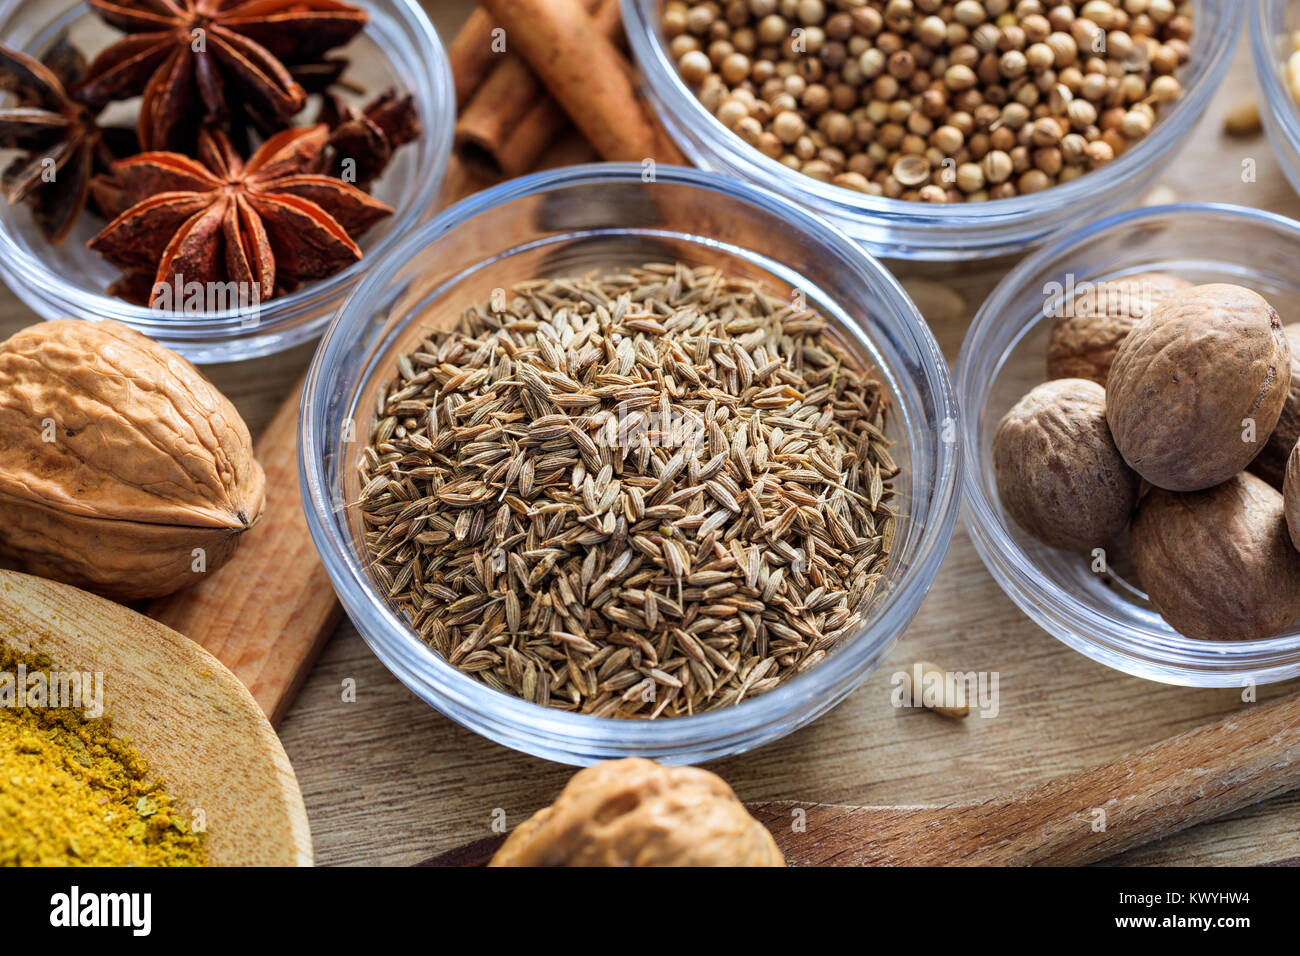 Cumin and other spices on a wooden surface Stock Photo